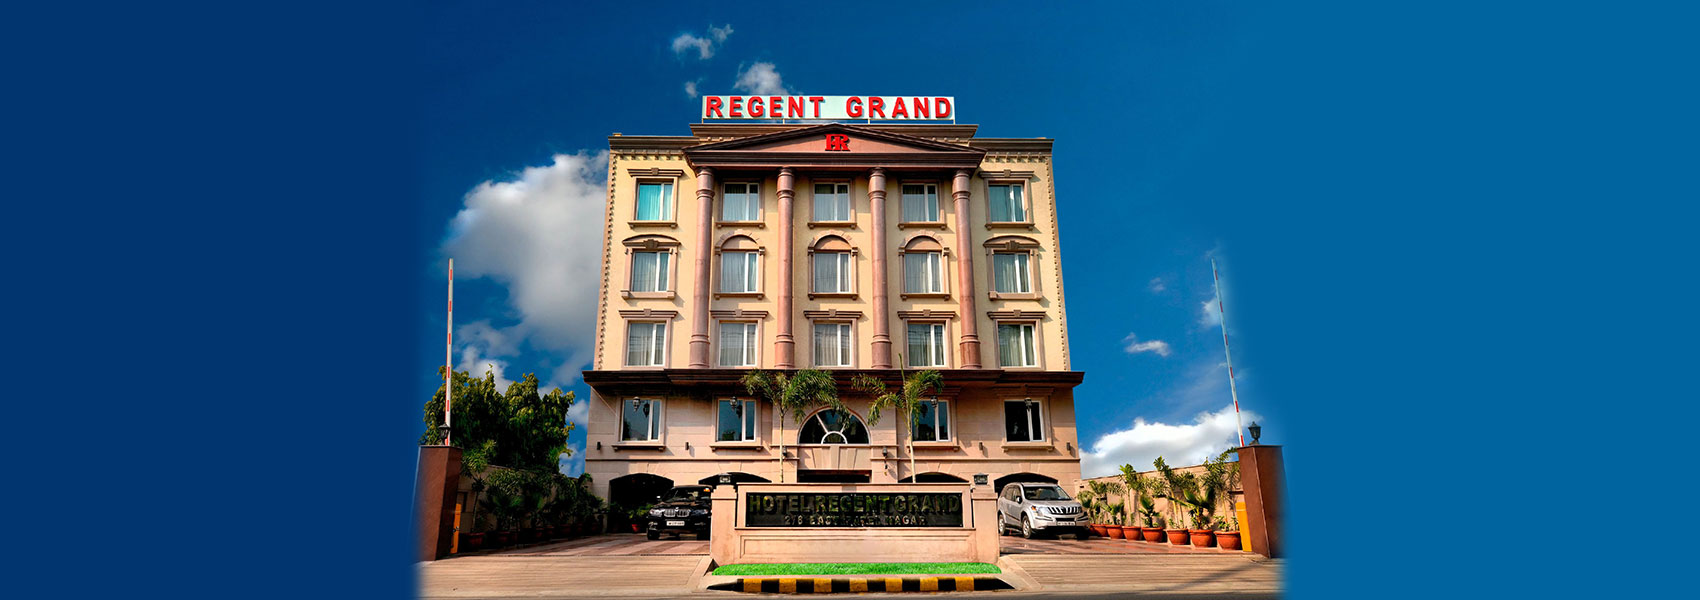 Front view of hotel regend grand